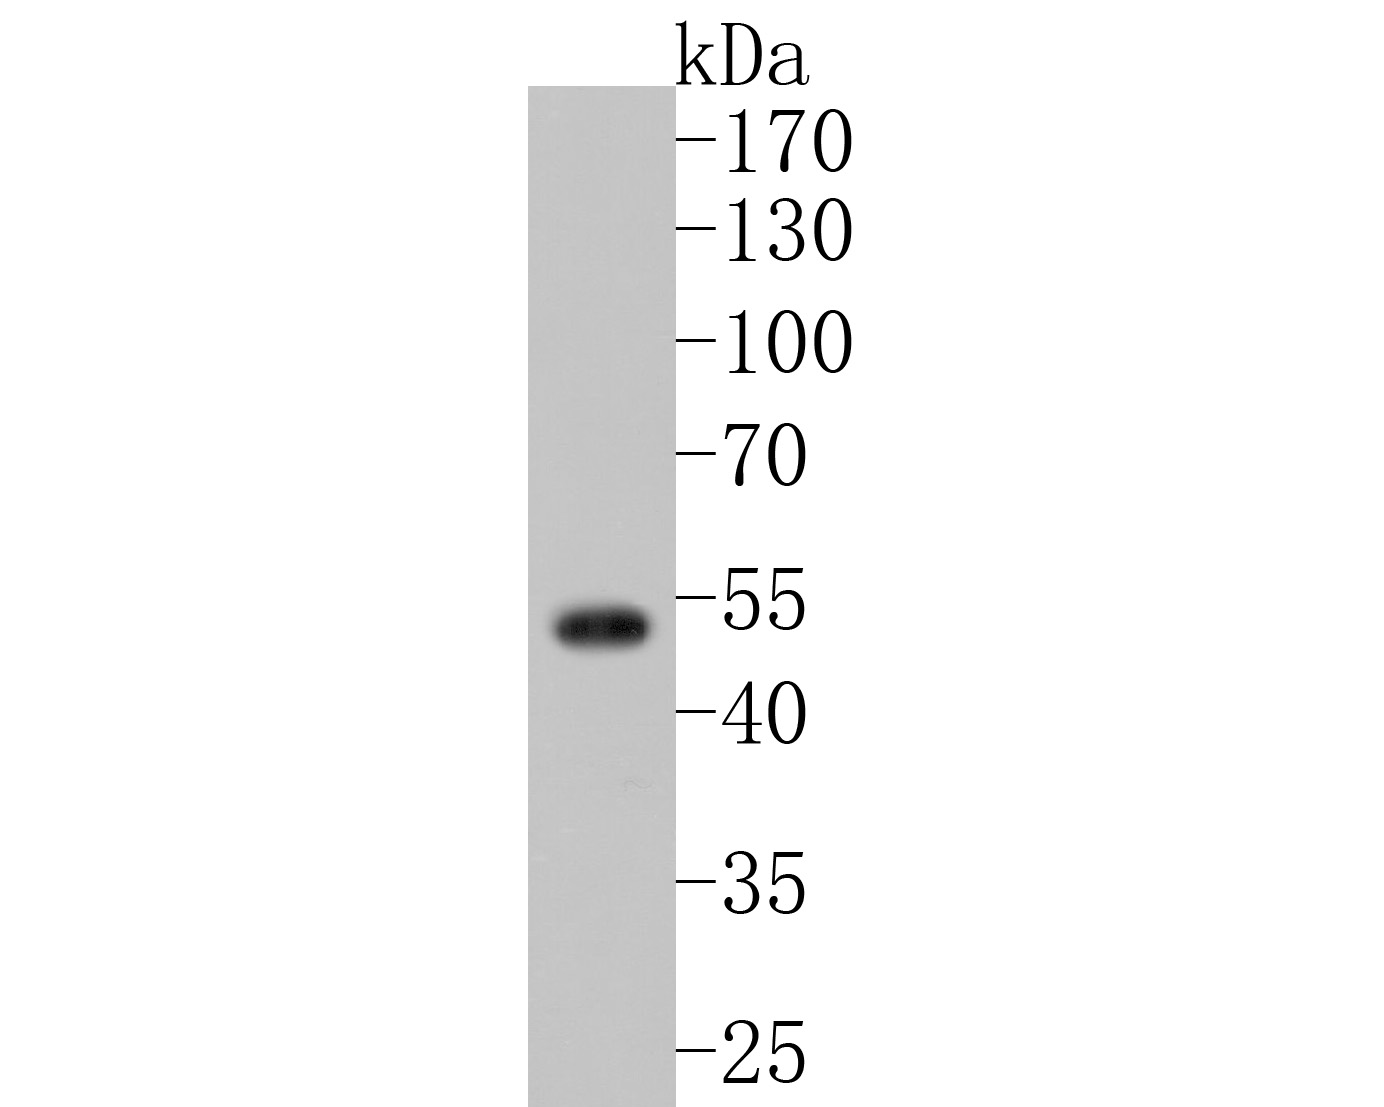 Western blot analysis of Fukutin on rat cerebellum tissue lysates. Proteins were transferred to a PVDF membrane and blocked with 5% BSA in PBS for 1 hour at room temperature. The primary antibody (HA720031, 1/500) was used in 5% BSA at room temperature for 2 hours. Goat Anti-Rabbit IgG - HRP Secondary Antibody (HA1001) at 1:200,000 dilution was used for 1 hour at room temperature.